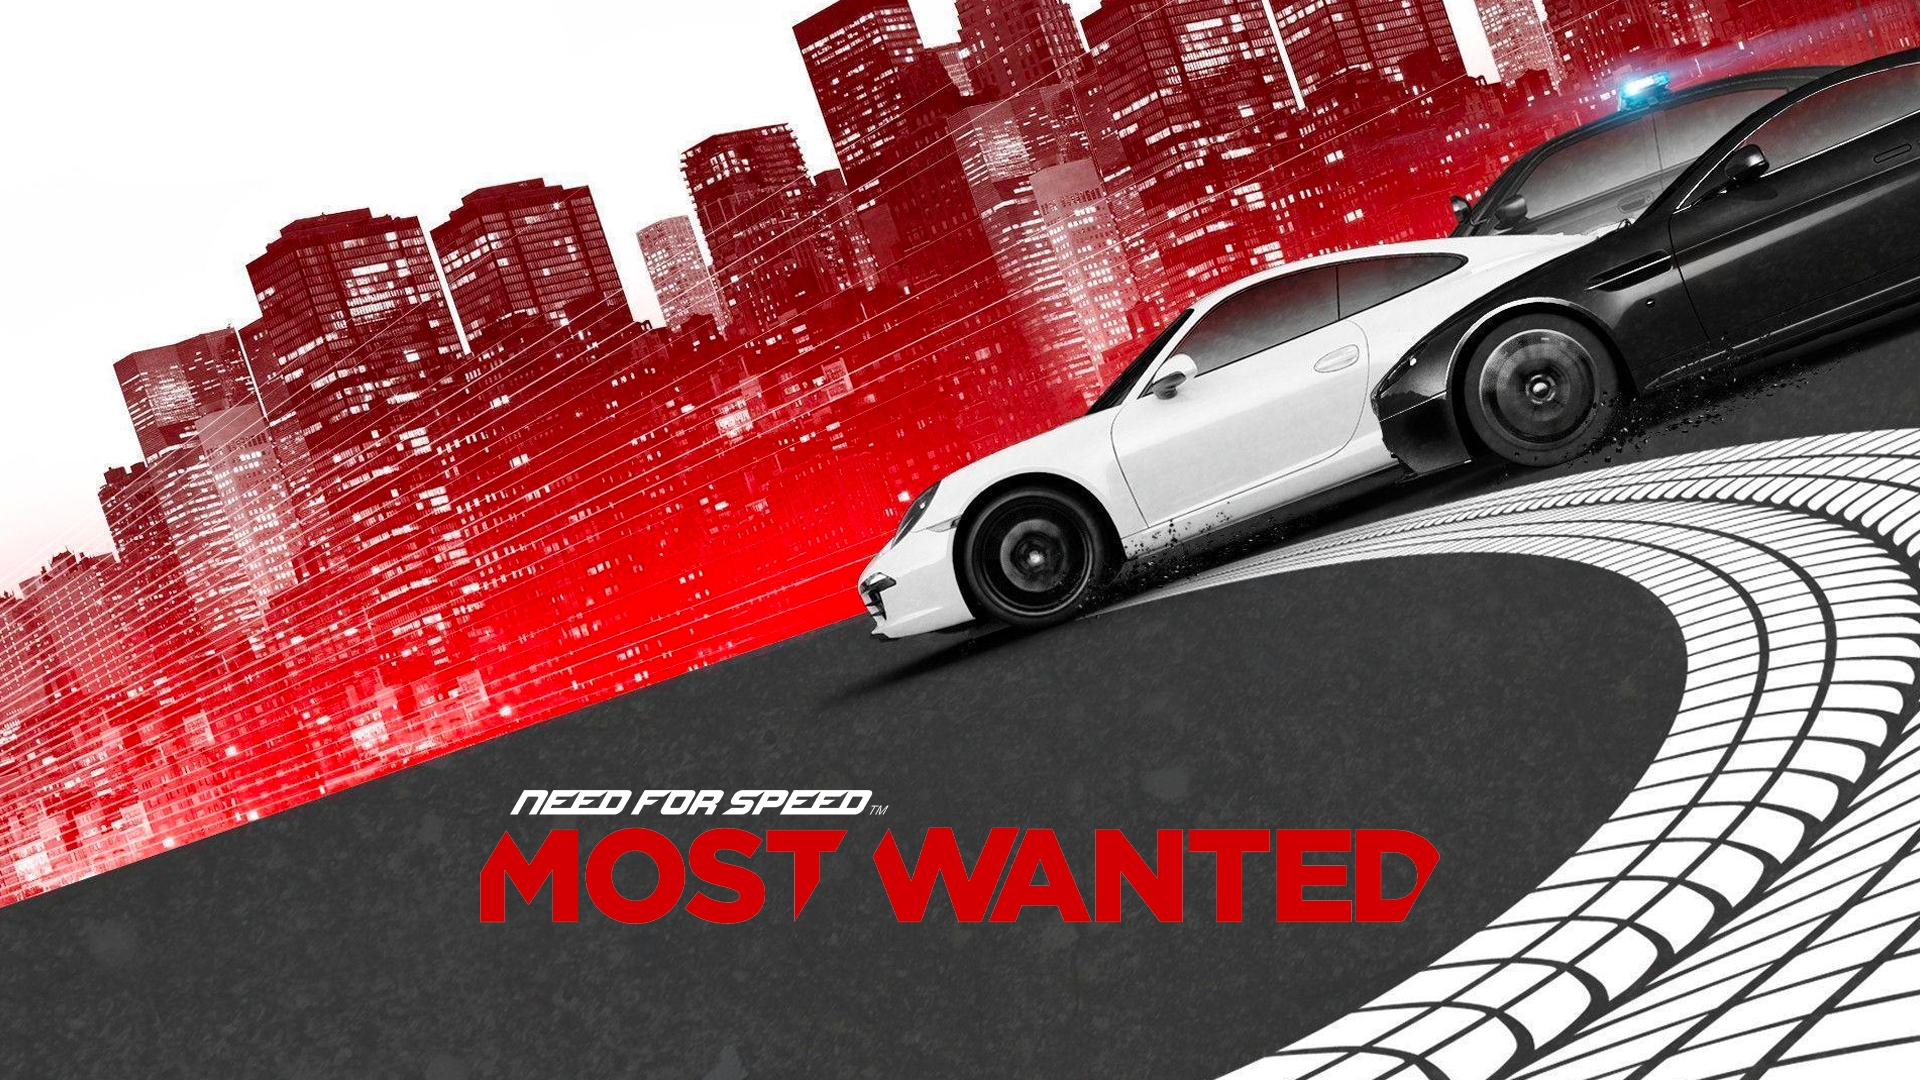 Need for speed most wanted 2012 mac os 64-bit